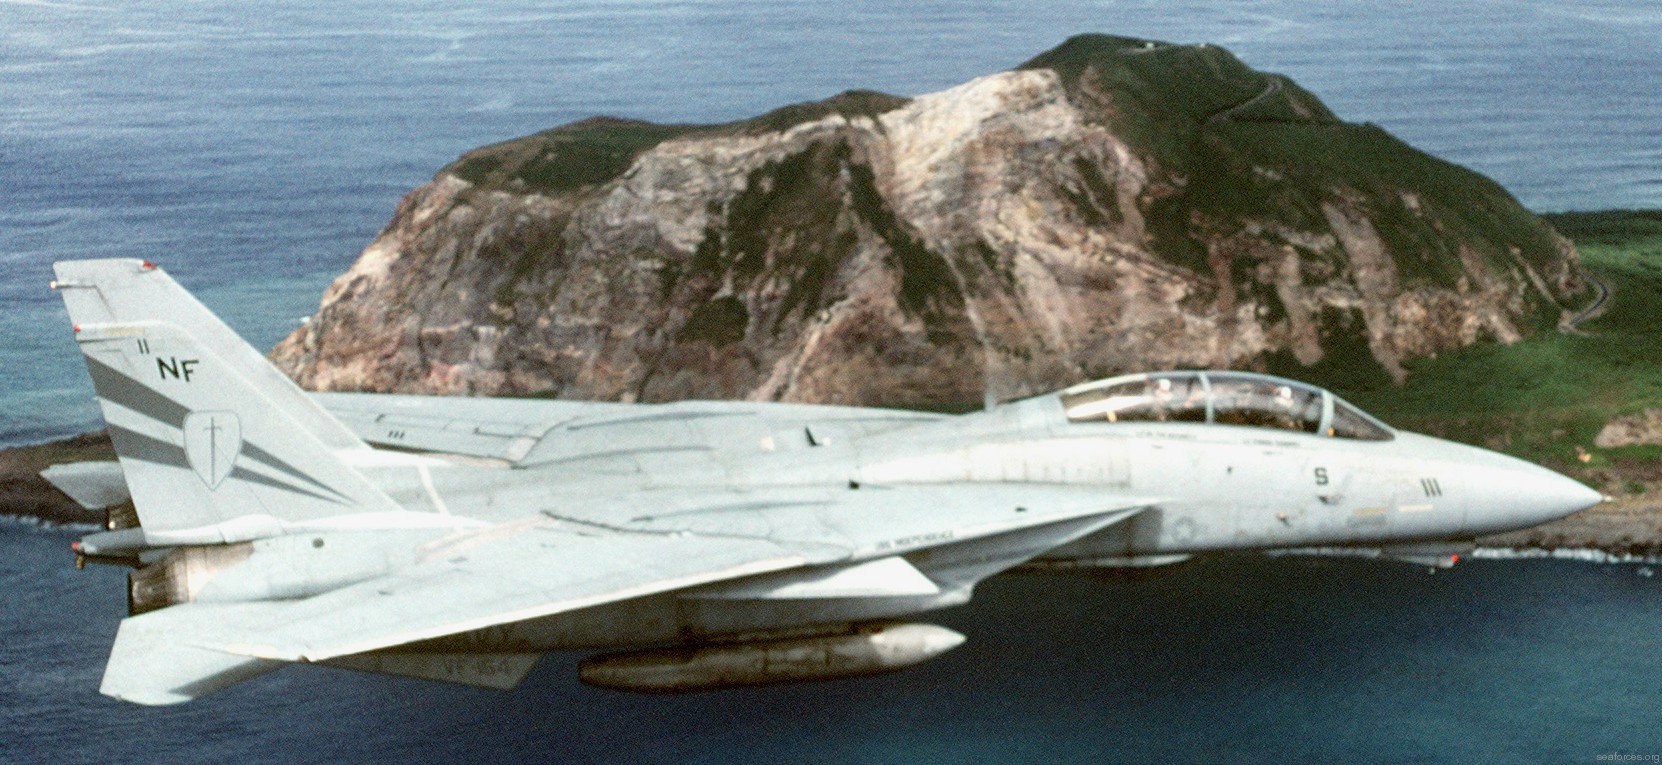 vf-154 black knights fighter squadron us navy f-14a tomcat carrier air wing cvw-5 06 iwo jima mount suribachi